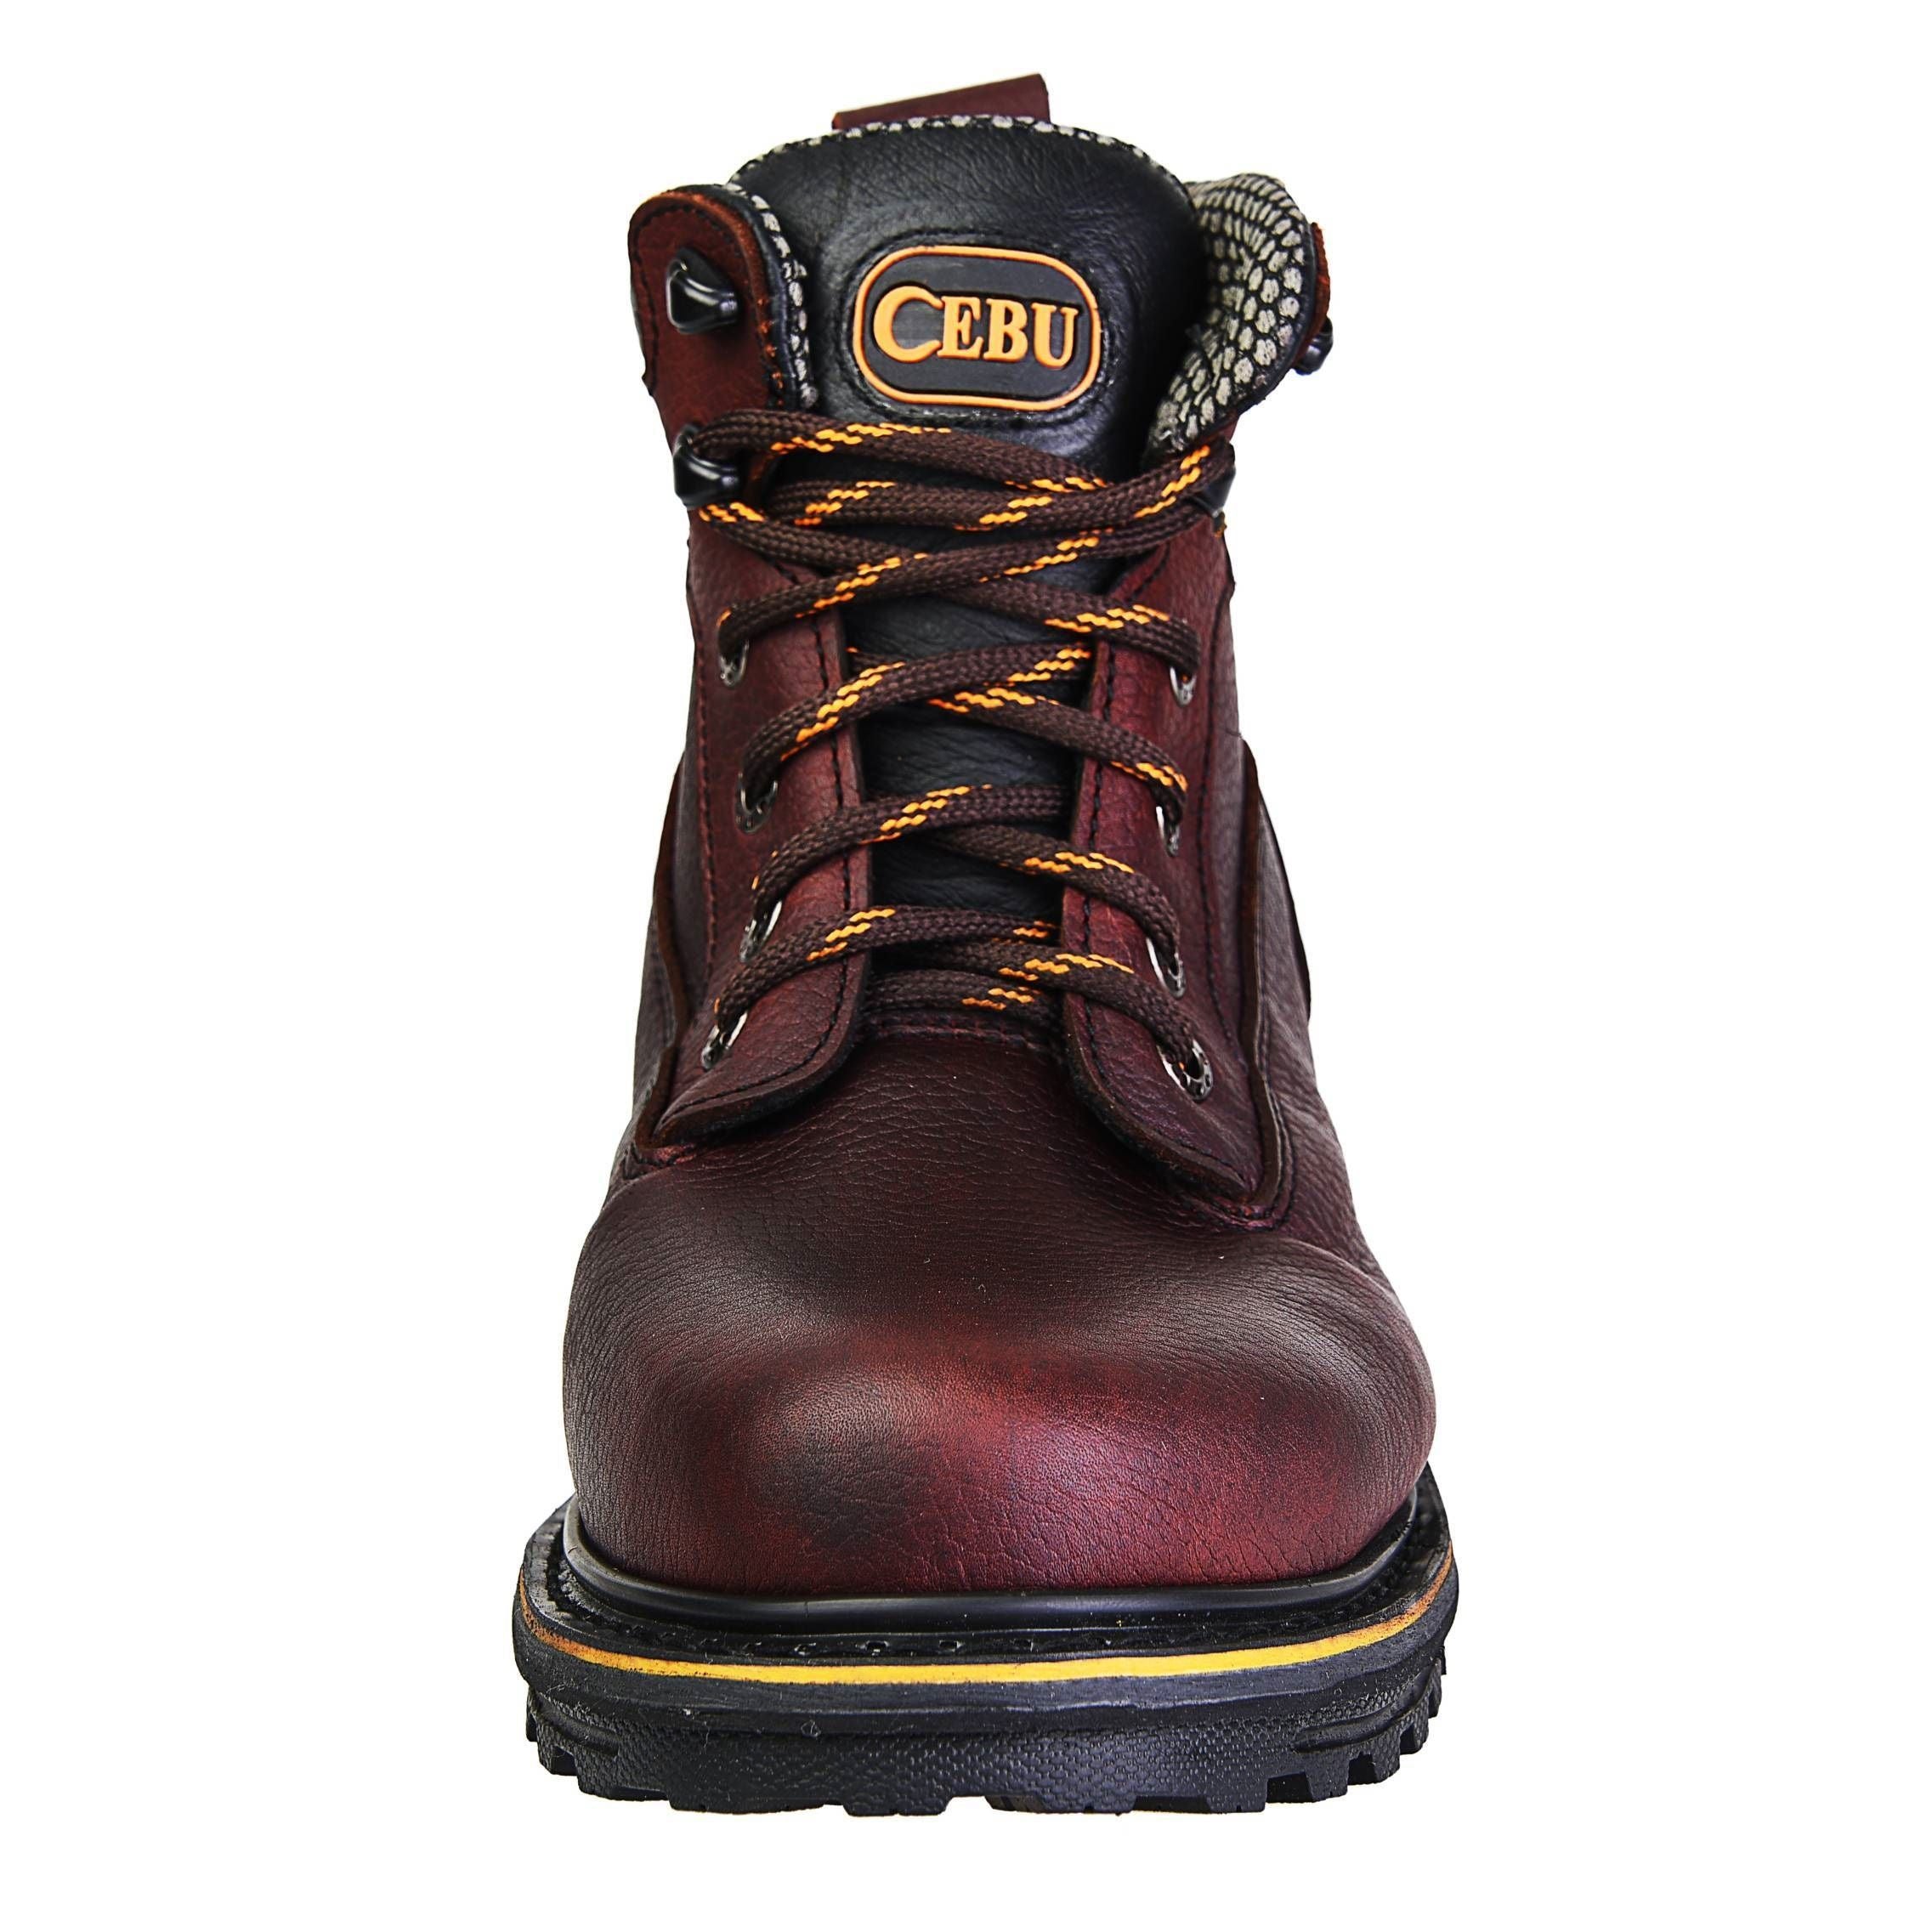 Men's Work Boots - Heavy Duty - Shedron Work Boots - Cebu - 6" Work Boots - Shedron 6in Work Boots